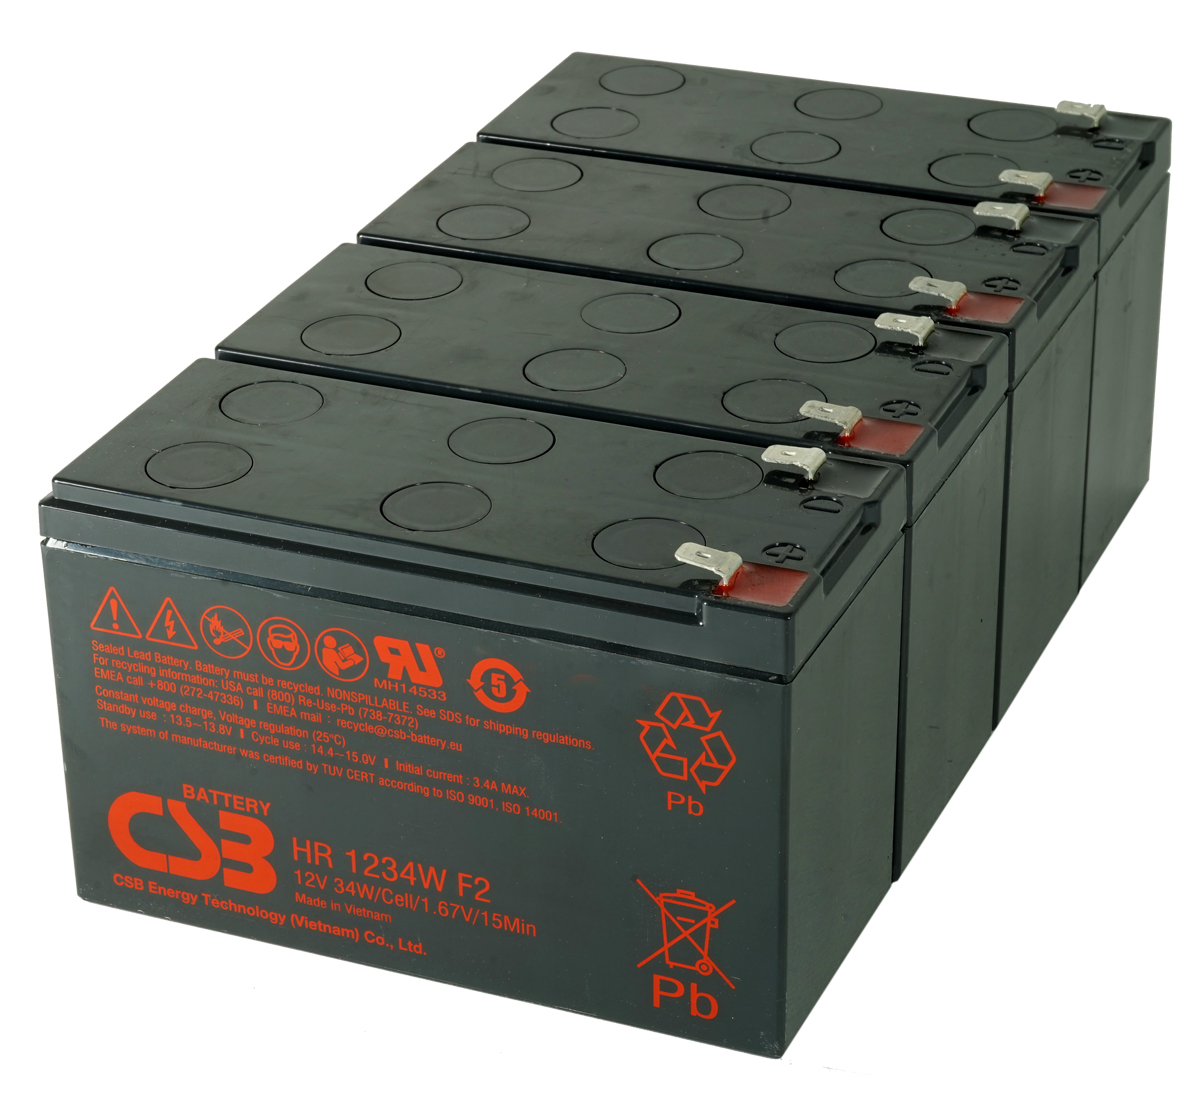 MDS2307 UPS Battery Kit for MGE AB2307